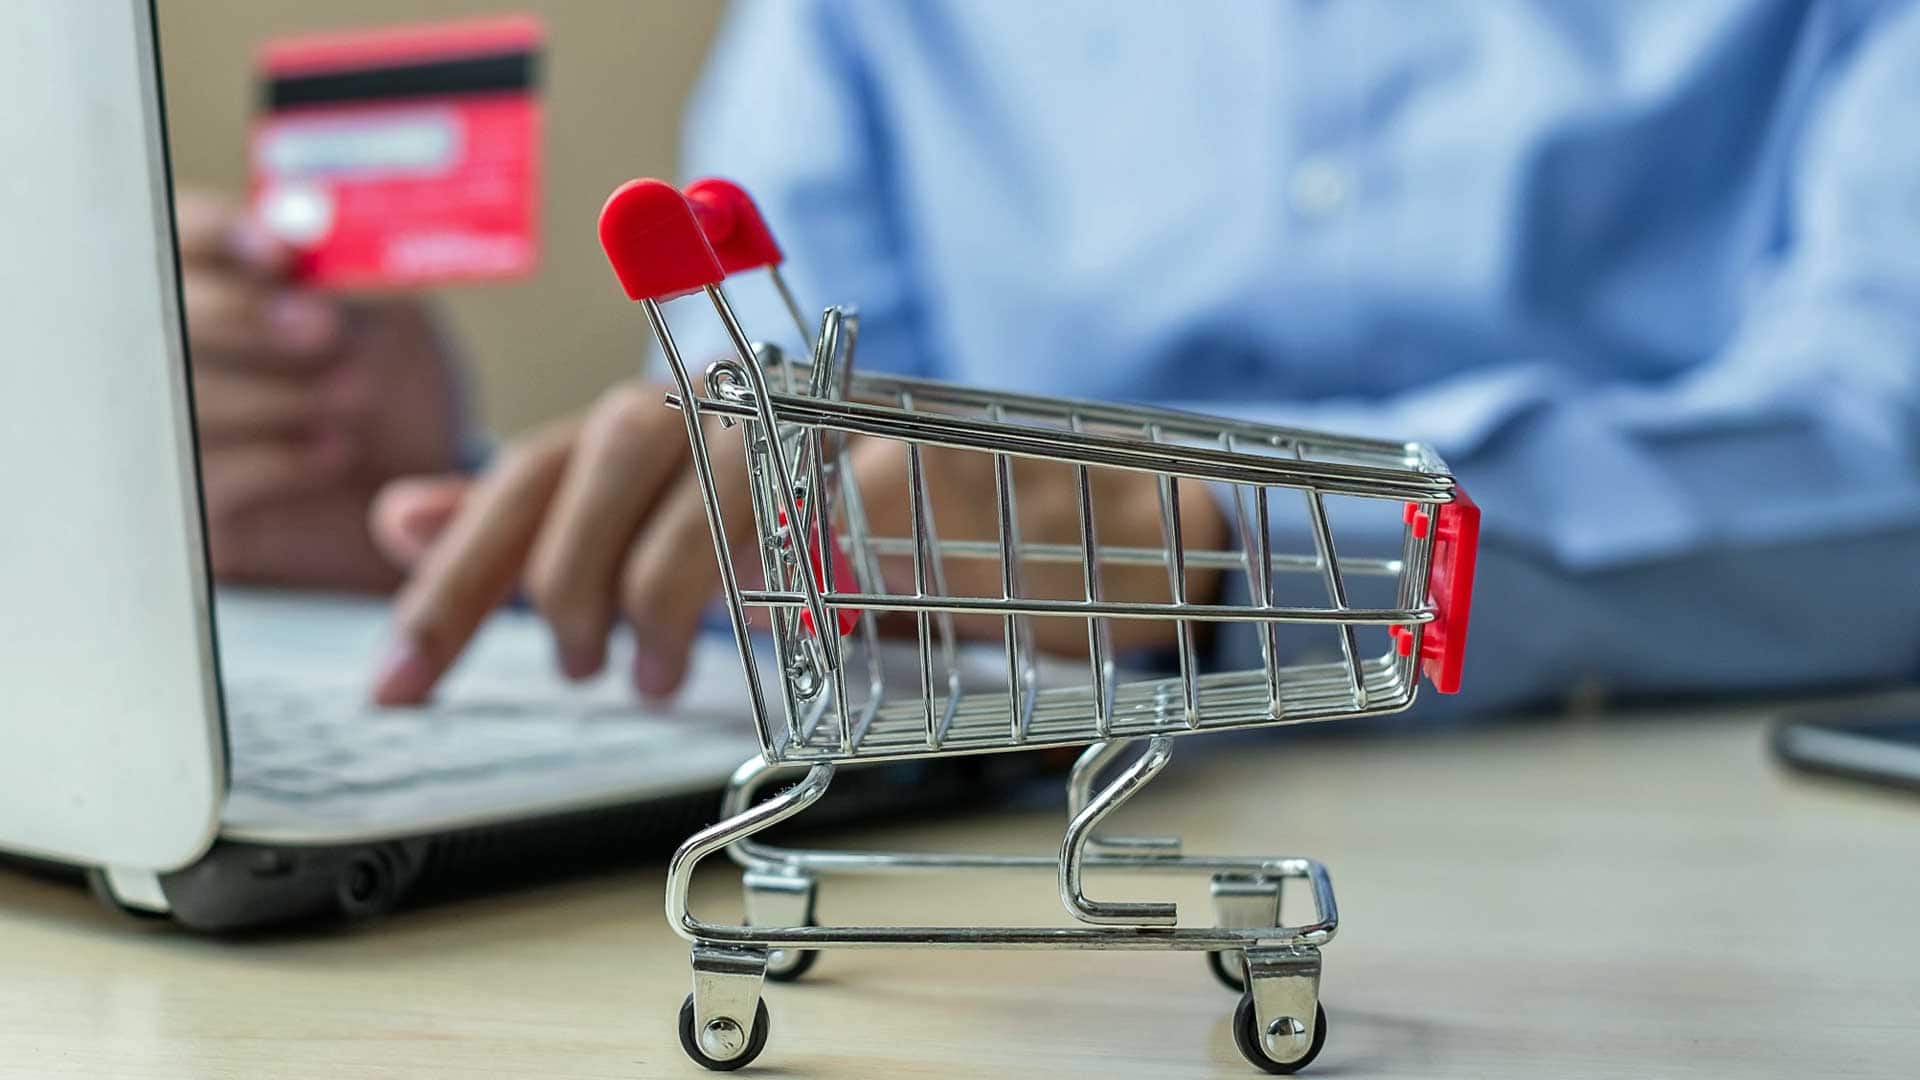 Photo of a model shopping cart and PC on a desk